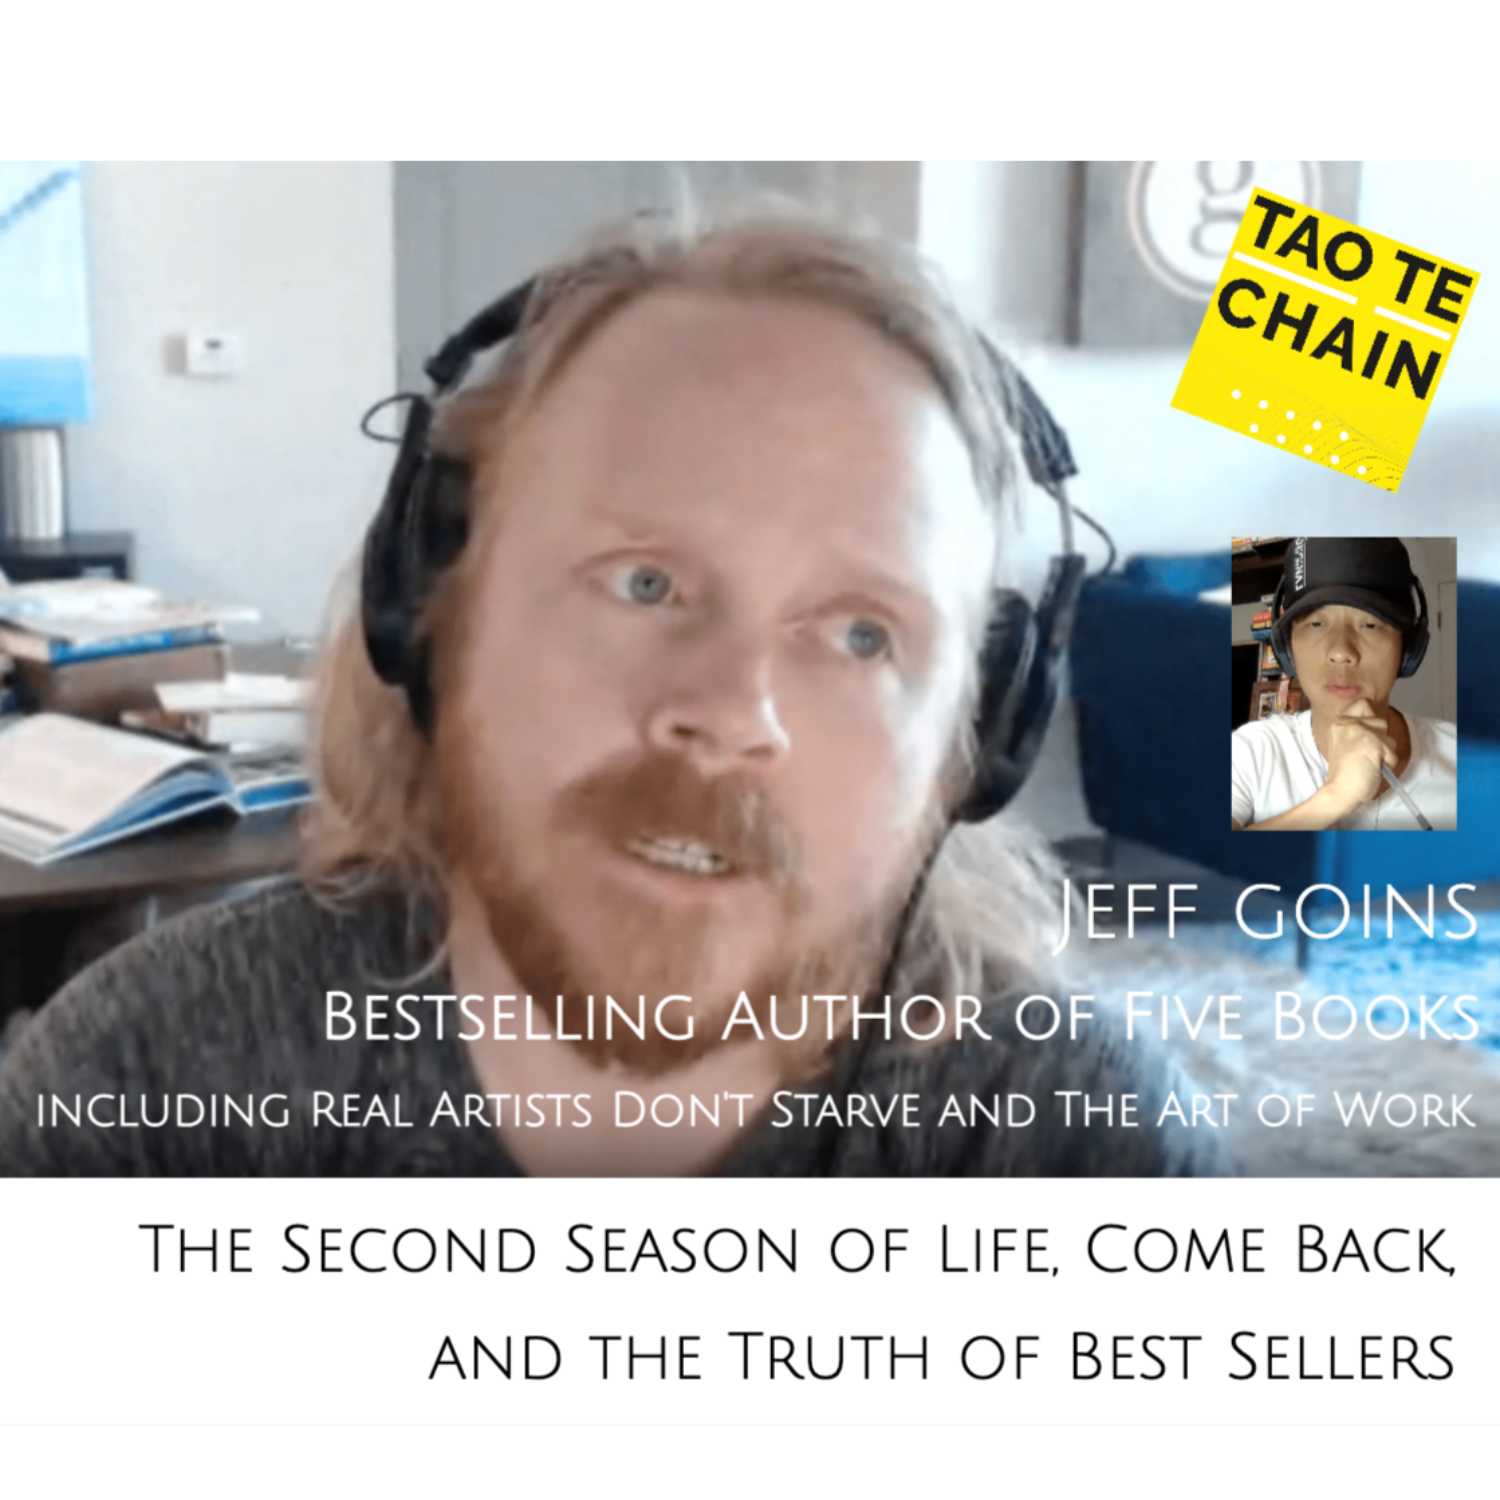 Jeff Goins - The Second Season of Life, Come Back, and the Truth of Best Sellers